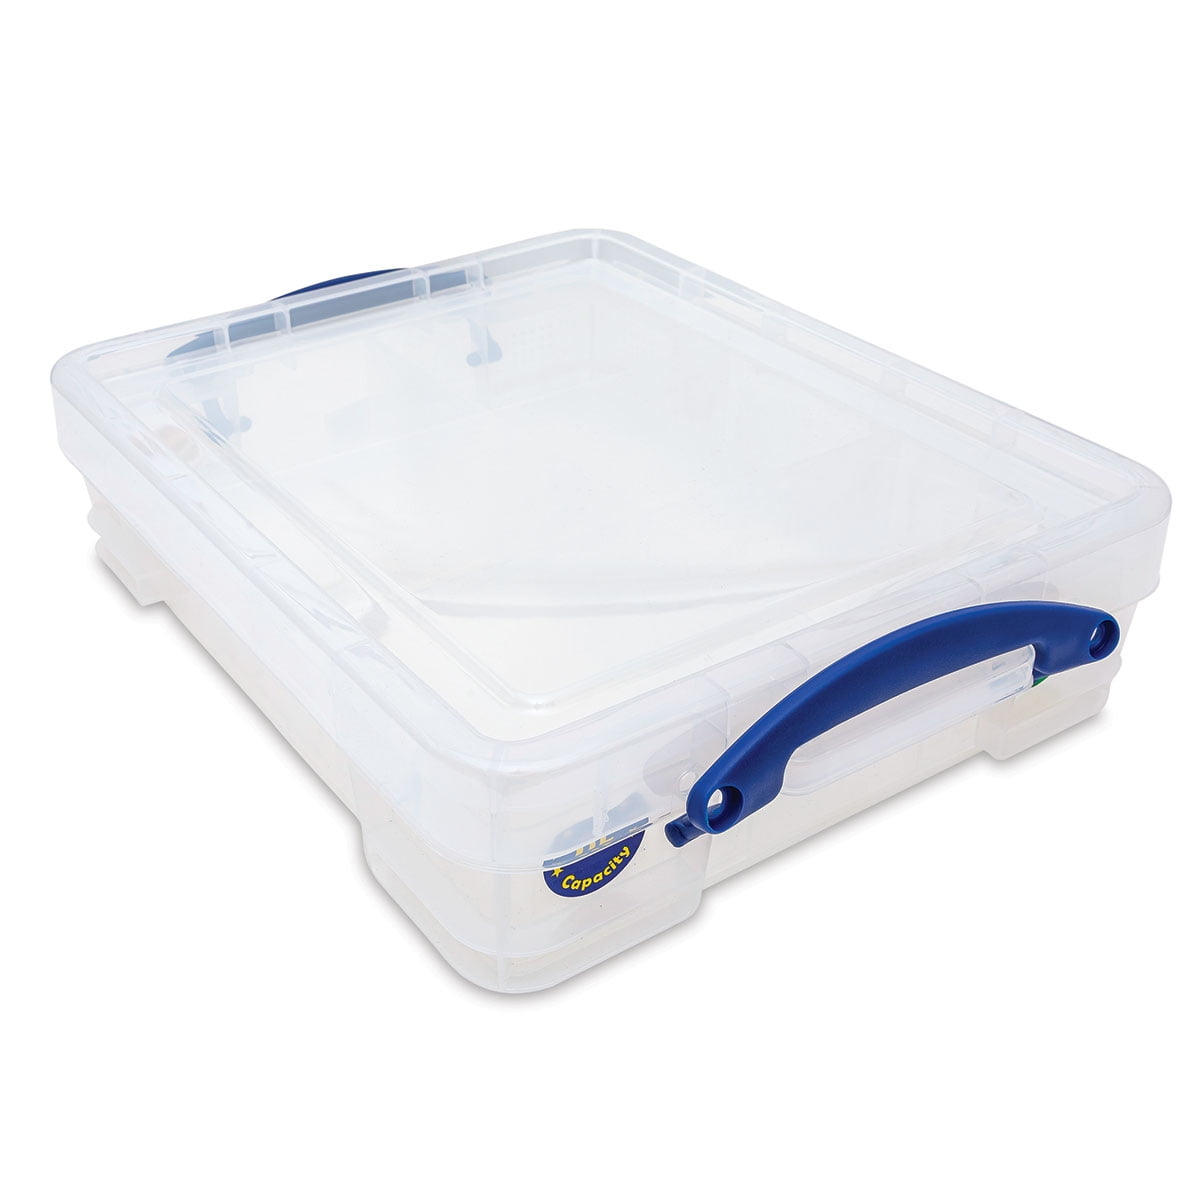 Sizes 33 - 84 Litre Really Useful Boxes Clear Storage Box - Underbed A3  Files 7